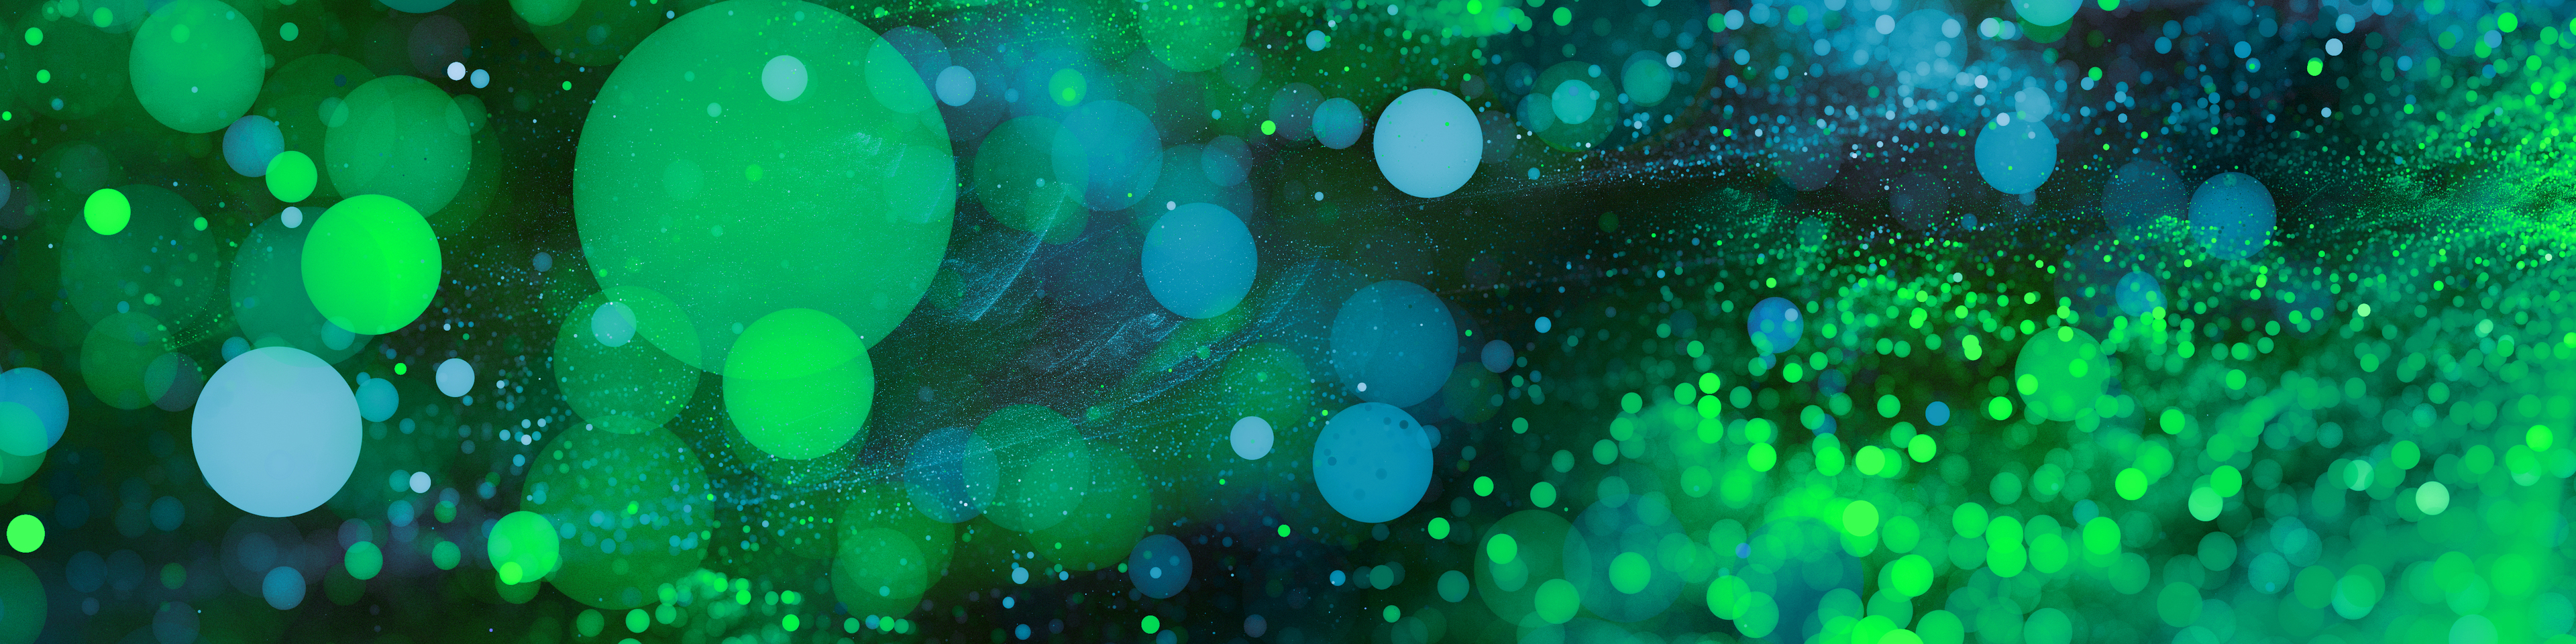 Abstract Green bokeh background. Sparkling spray and circles with depth blur. Fractal artwork for creative design